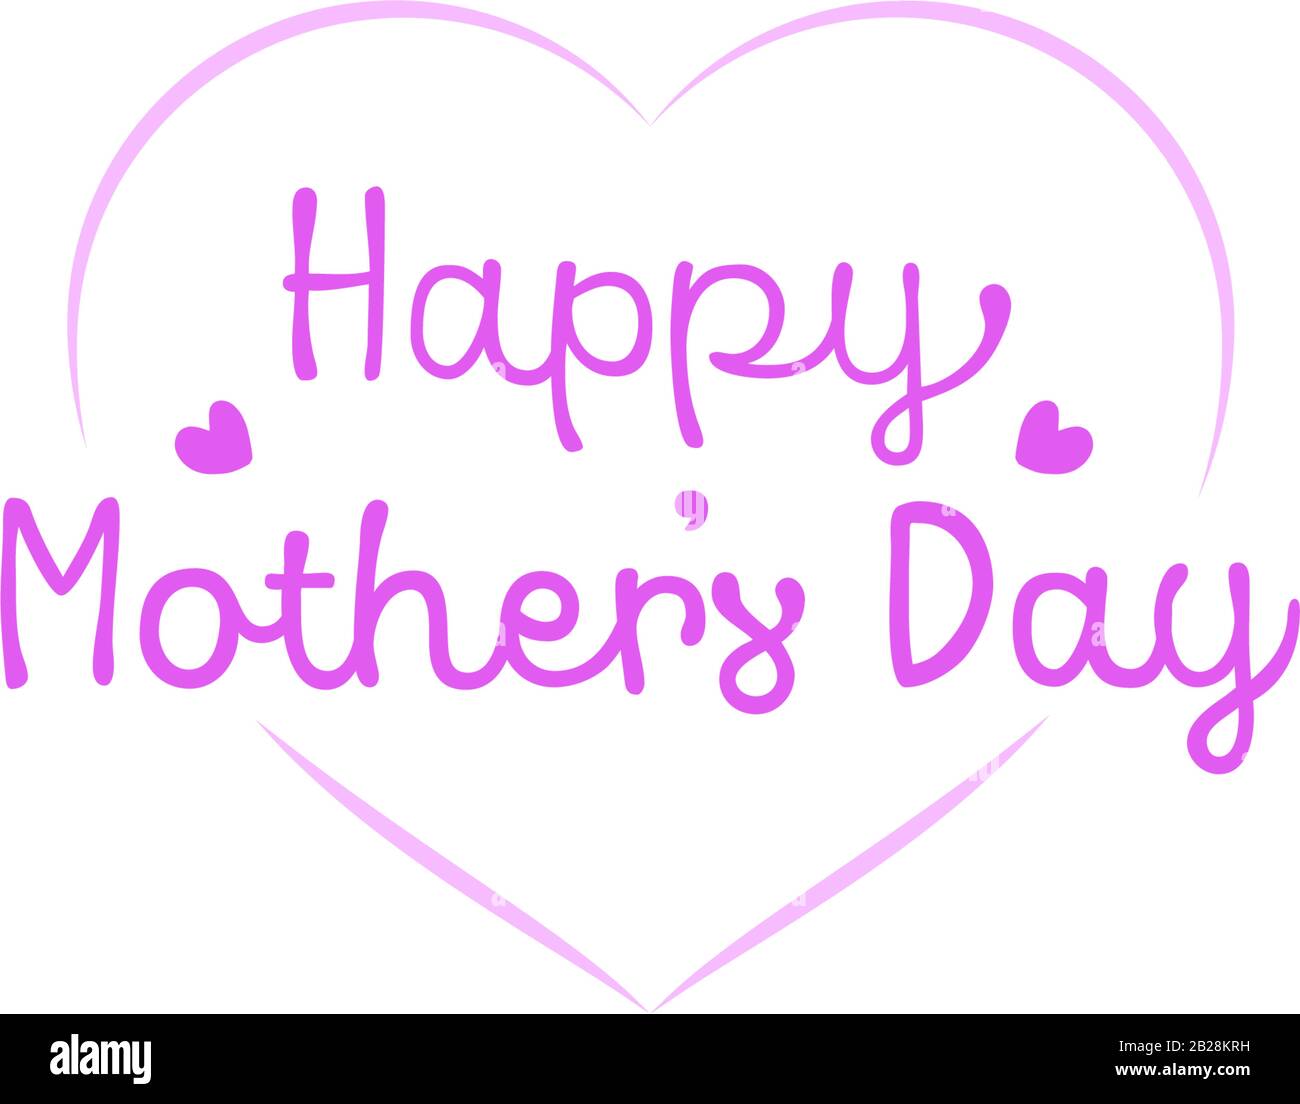 Happy Mother's Day Greeting Vector Illustration for any design Stock Vector